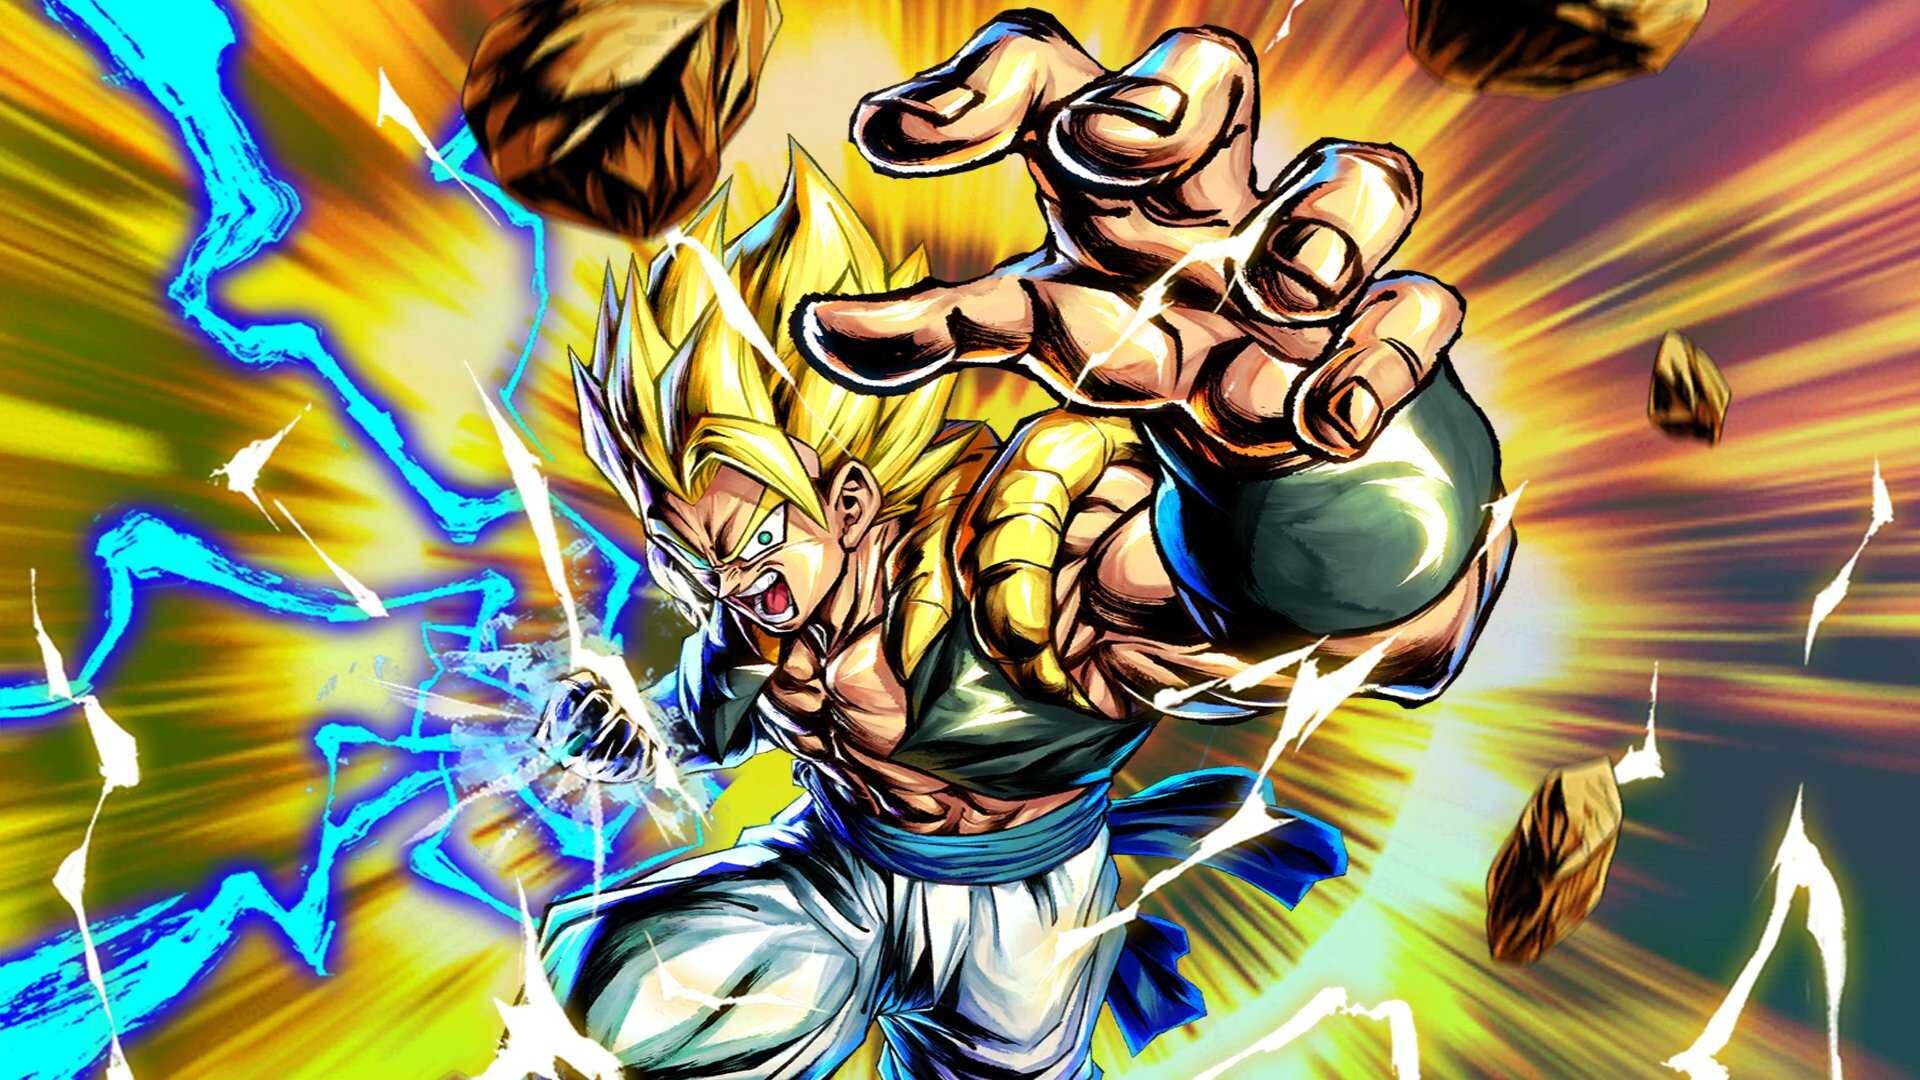 Gogeta: A character that first appears when Goku and Vegeta fused in Hell to defeat Super Janemba. 1920x1080 Full HD Background.